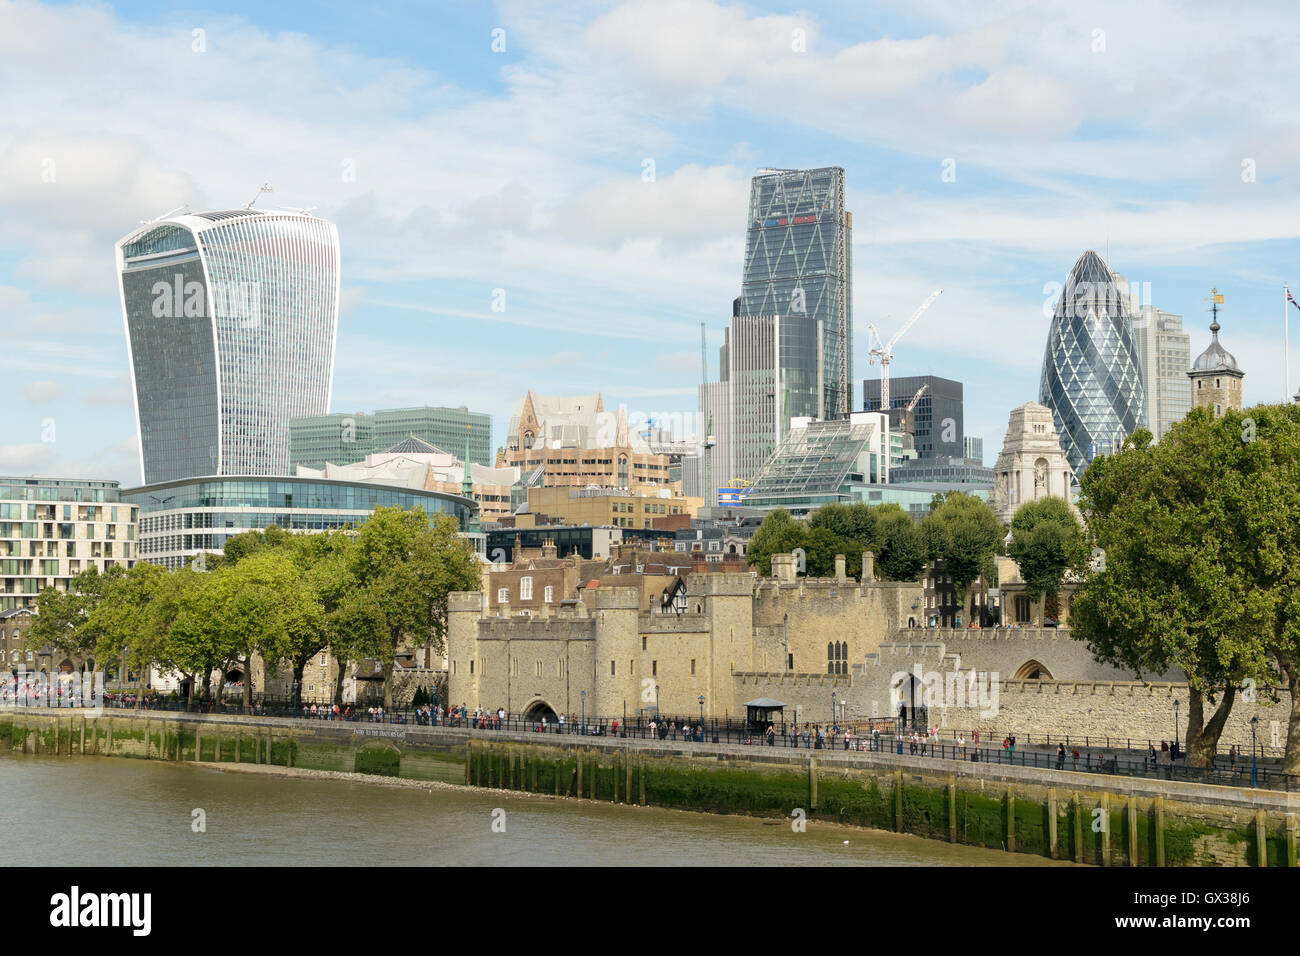 London, UK - 31 August 2016: City of London view. View of Walkie Talkie, Cheesegrater and The Gherkin Buildings Stock Photo